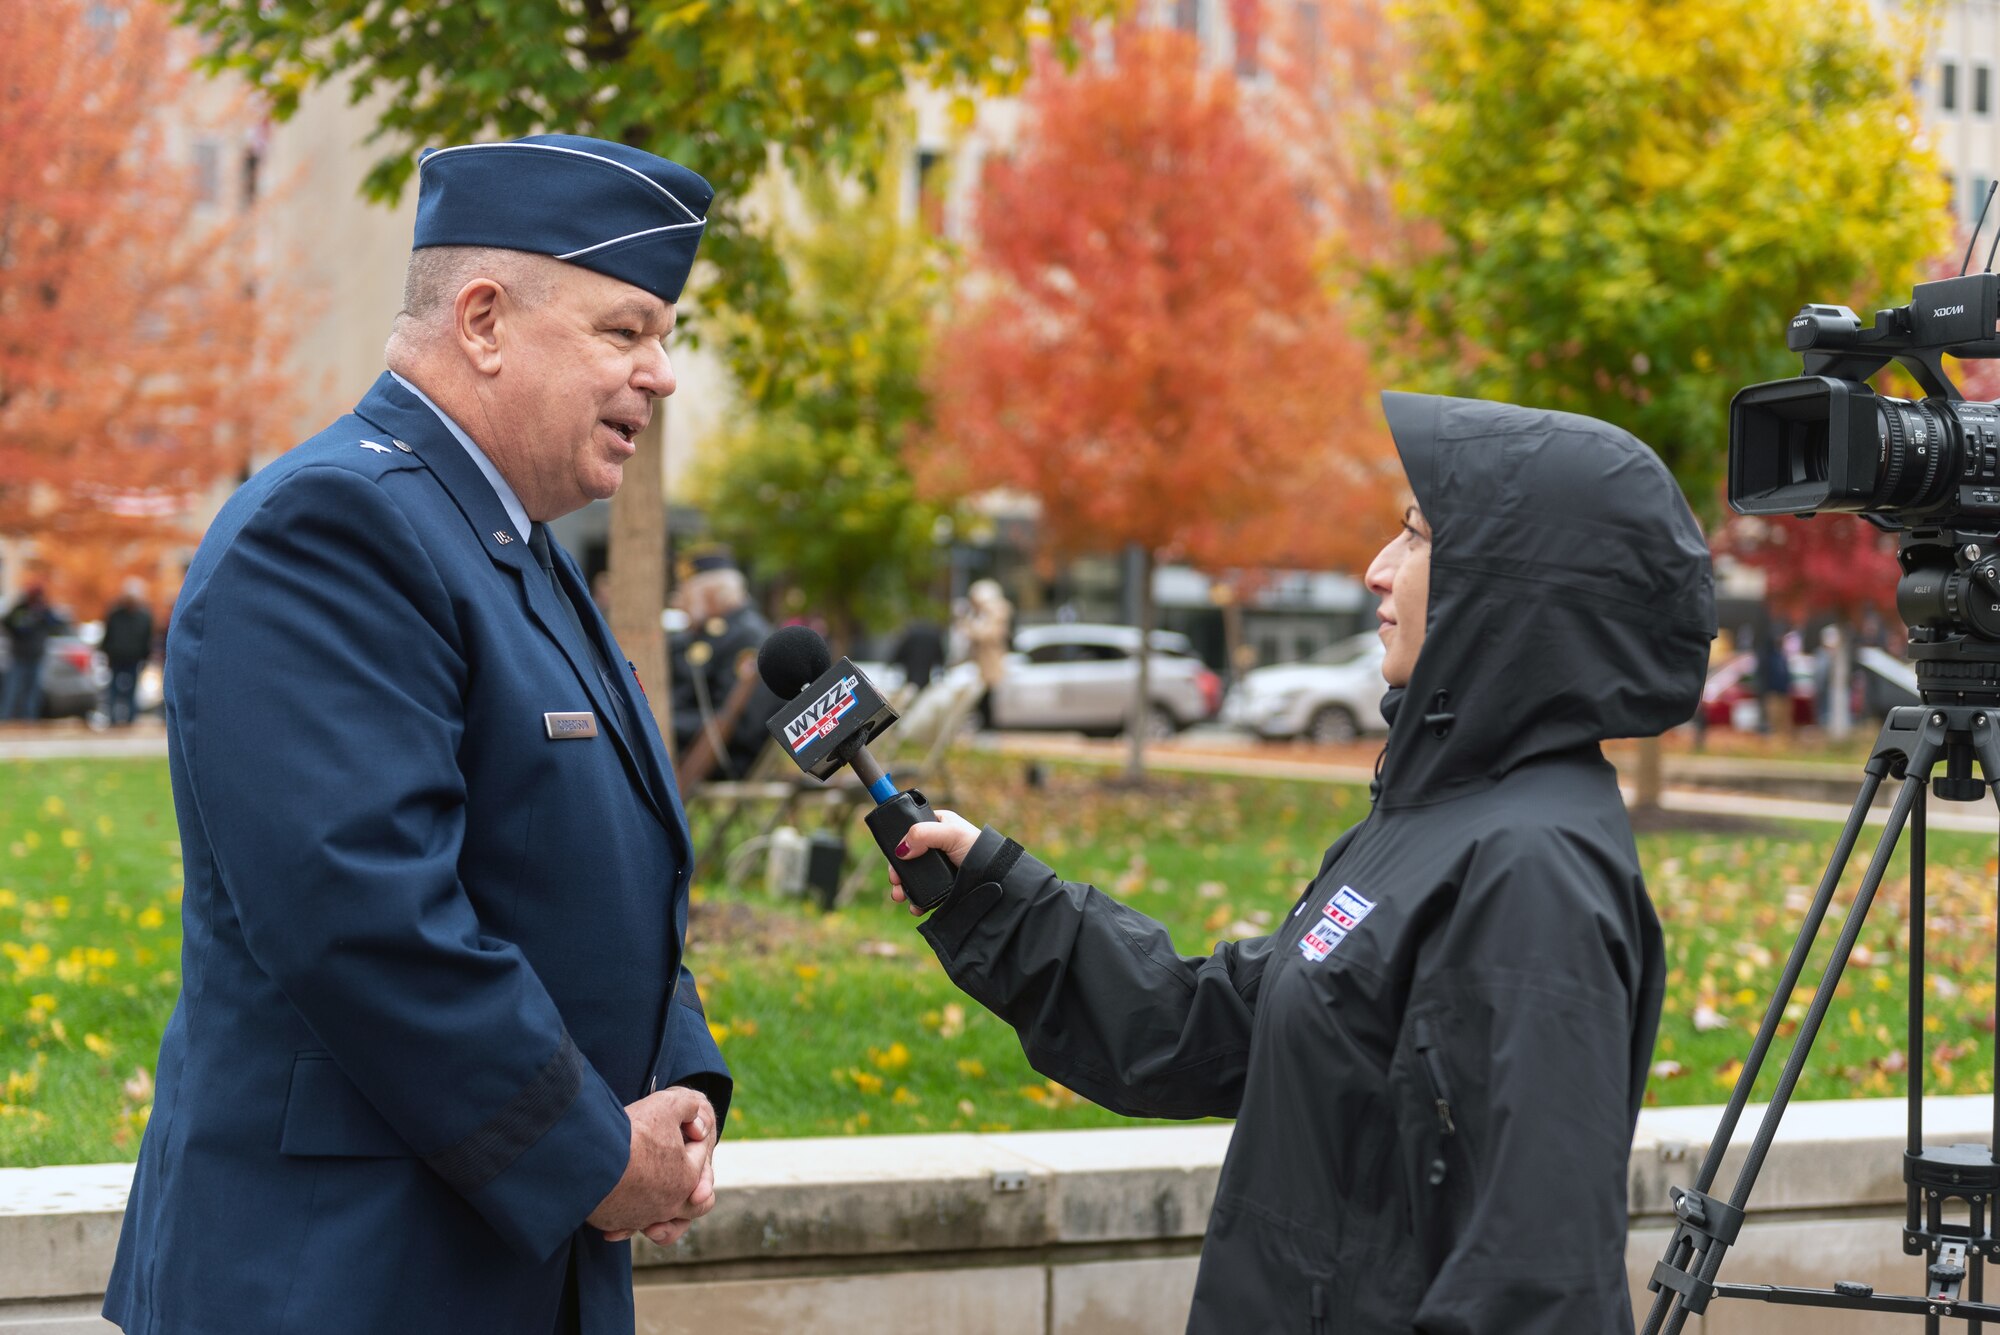 Airman giving interview to reporter.